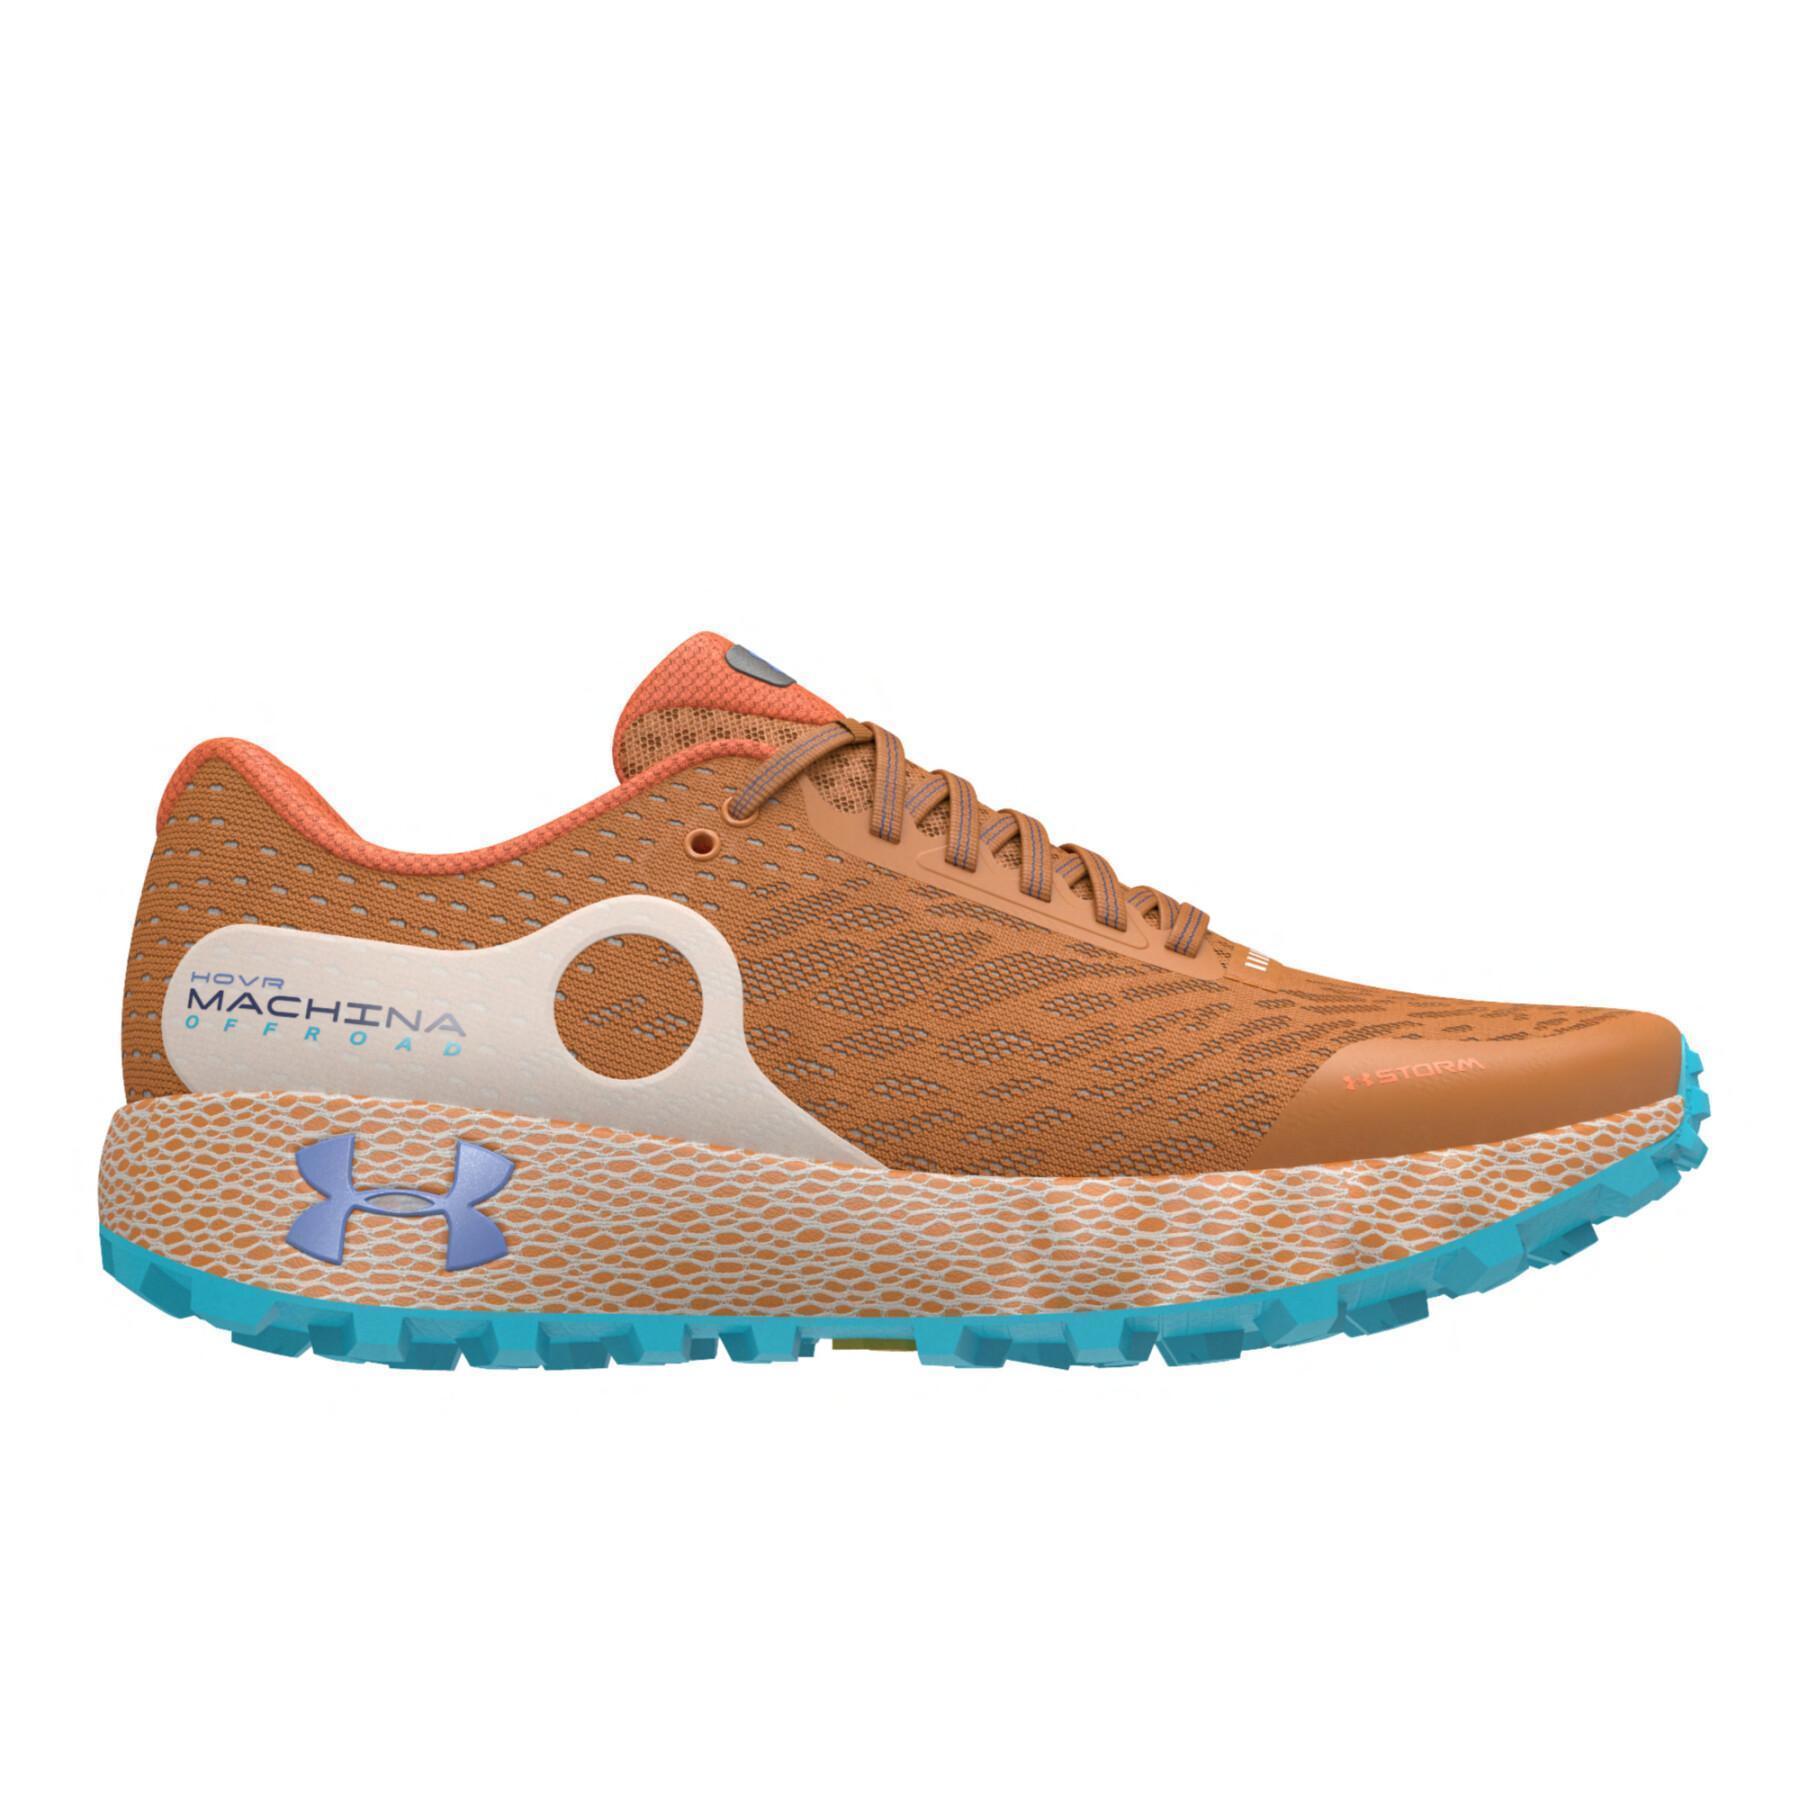 Running shoes Under Armour HOVR™ Machina Off Road